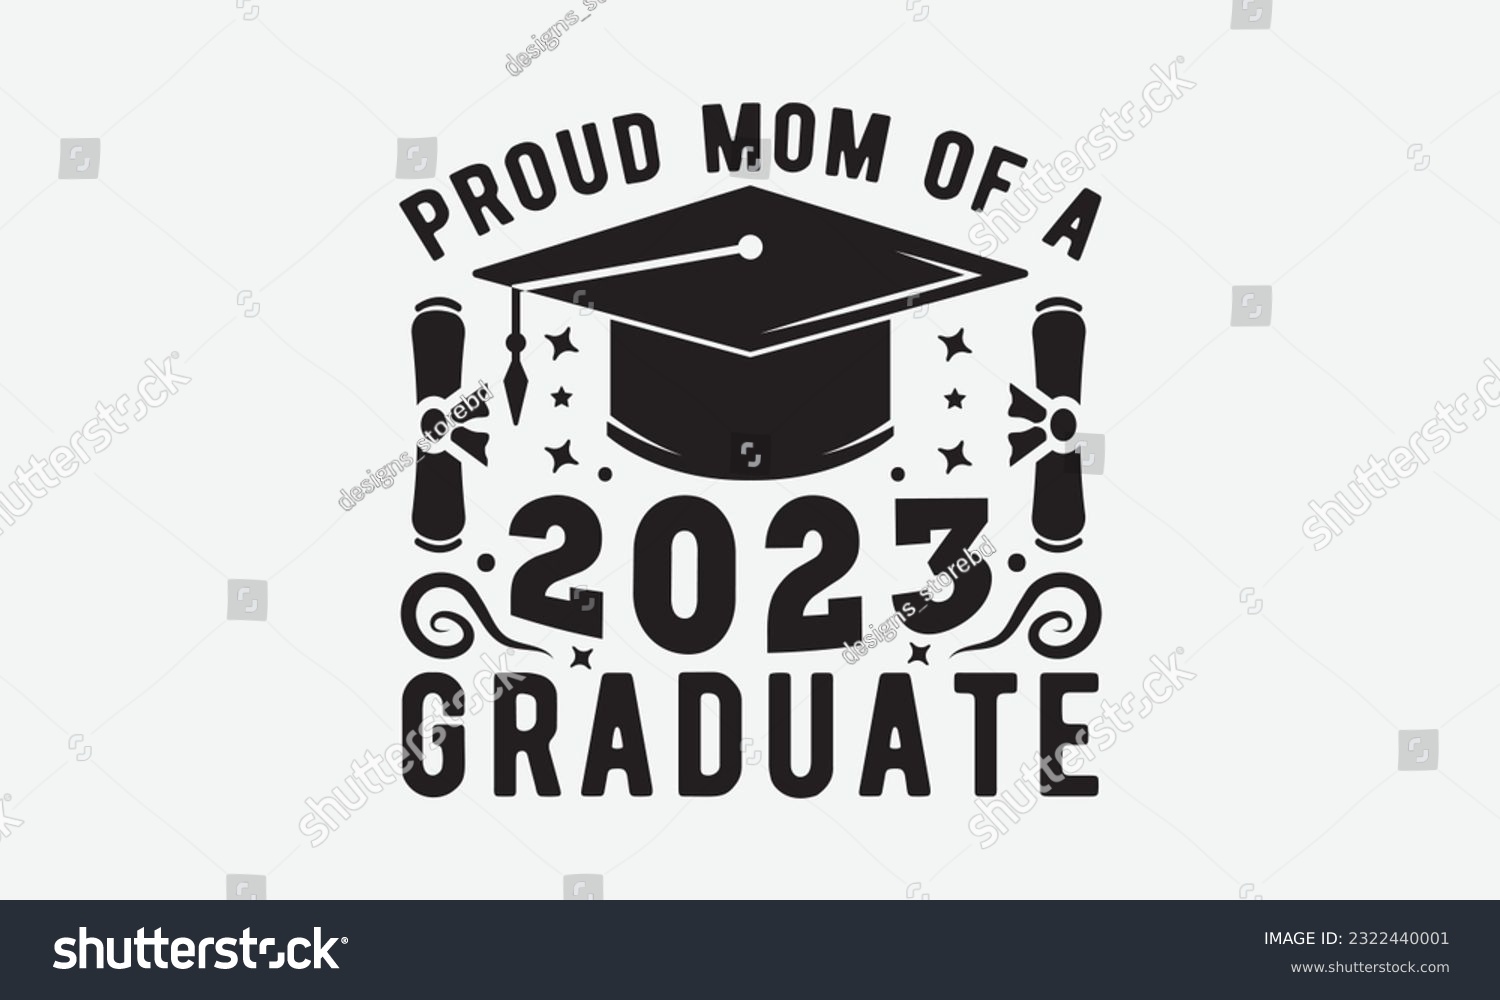 SVG of Proud mom of a 2023 graduate svg, Graduation SVG , Class of 2023 Graduation SVG Bundle, Graduation cap svg, T shirt Calligraphy phrase for Christmas, Hand drawn lettering for Xmas greetings cards svg